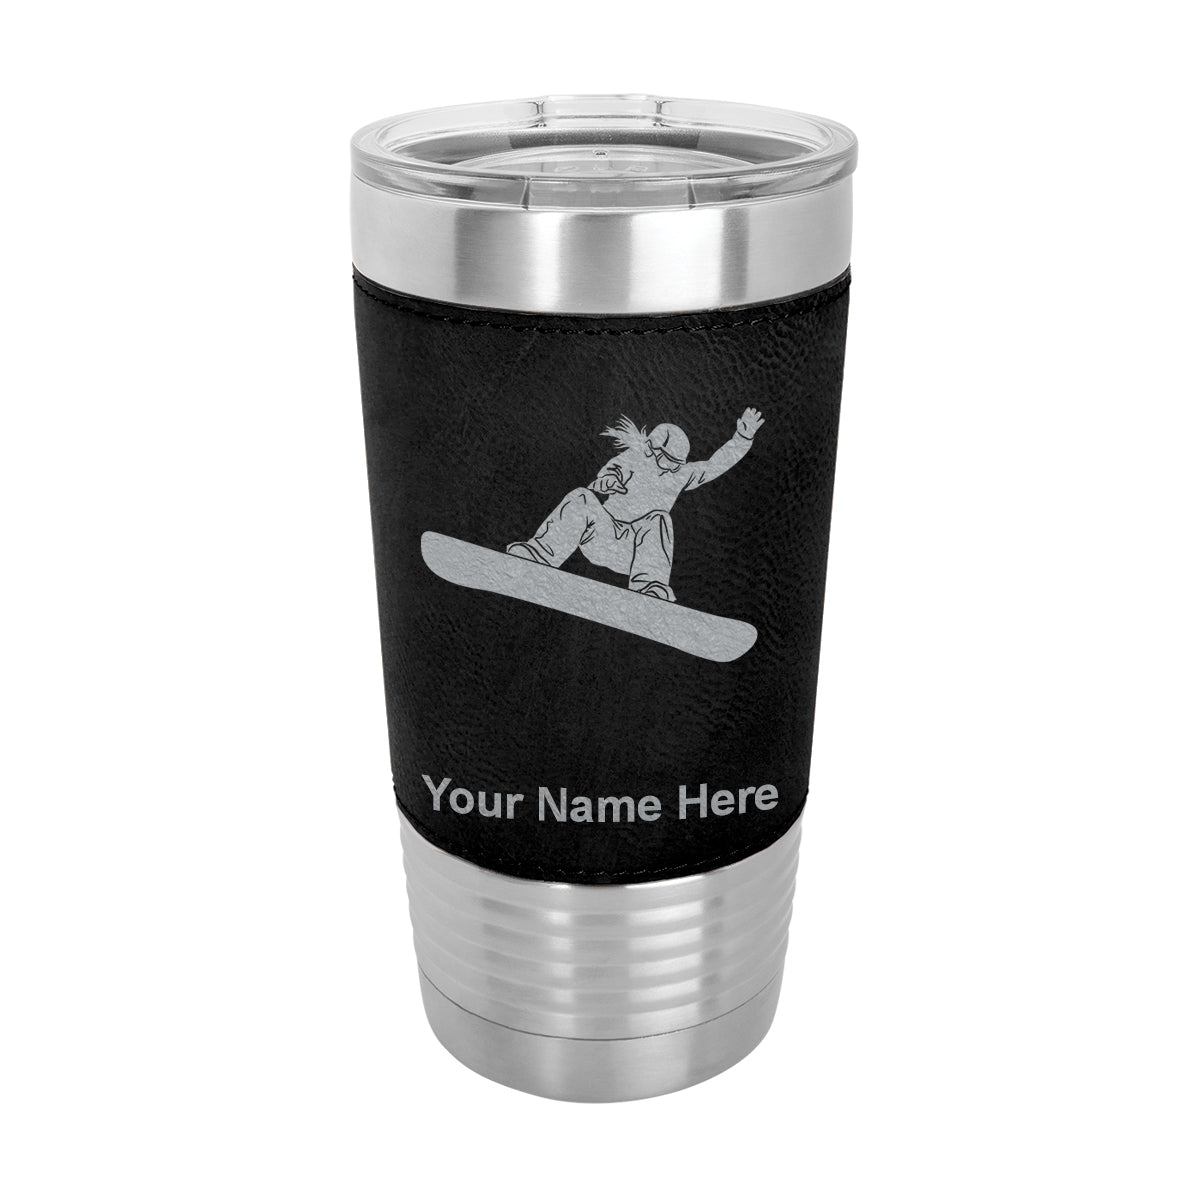 20oz Faux Leather Tumbler Mug, Snowboarder Woman, Personalized Engraving Included - LaserGram Custom Engraved Gifts